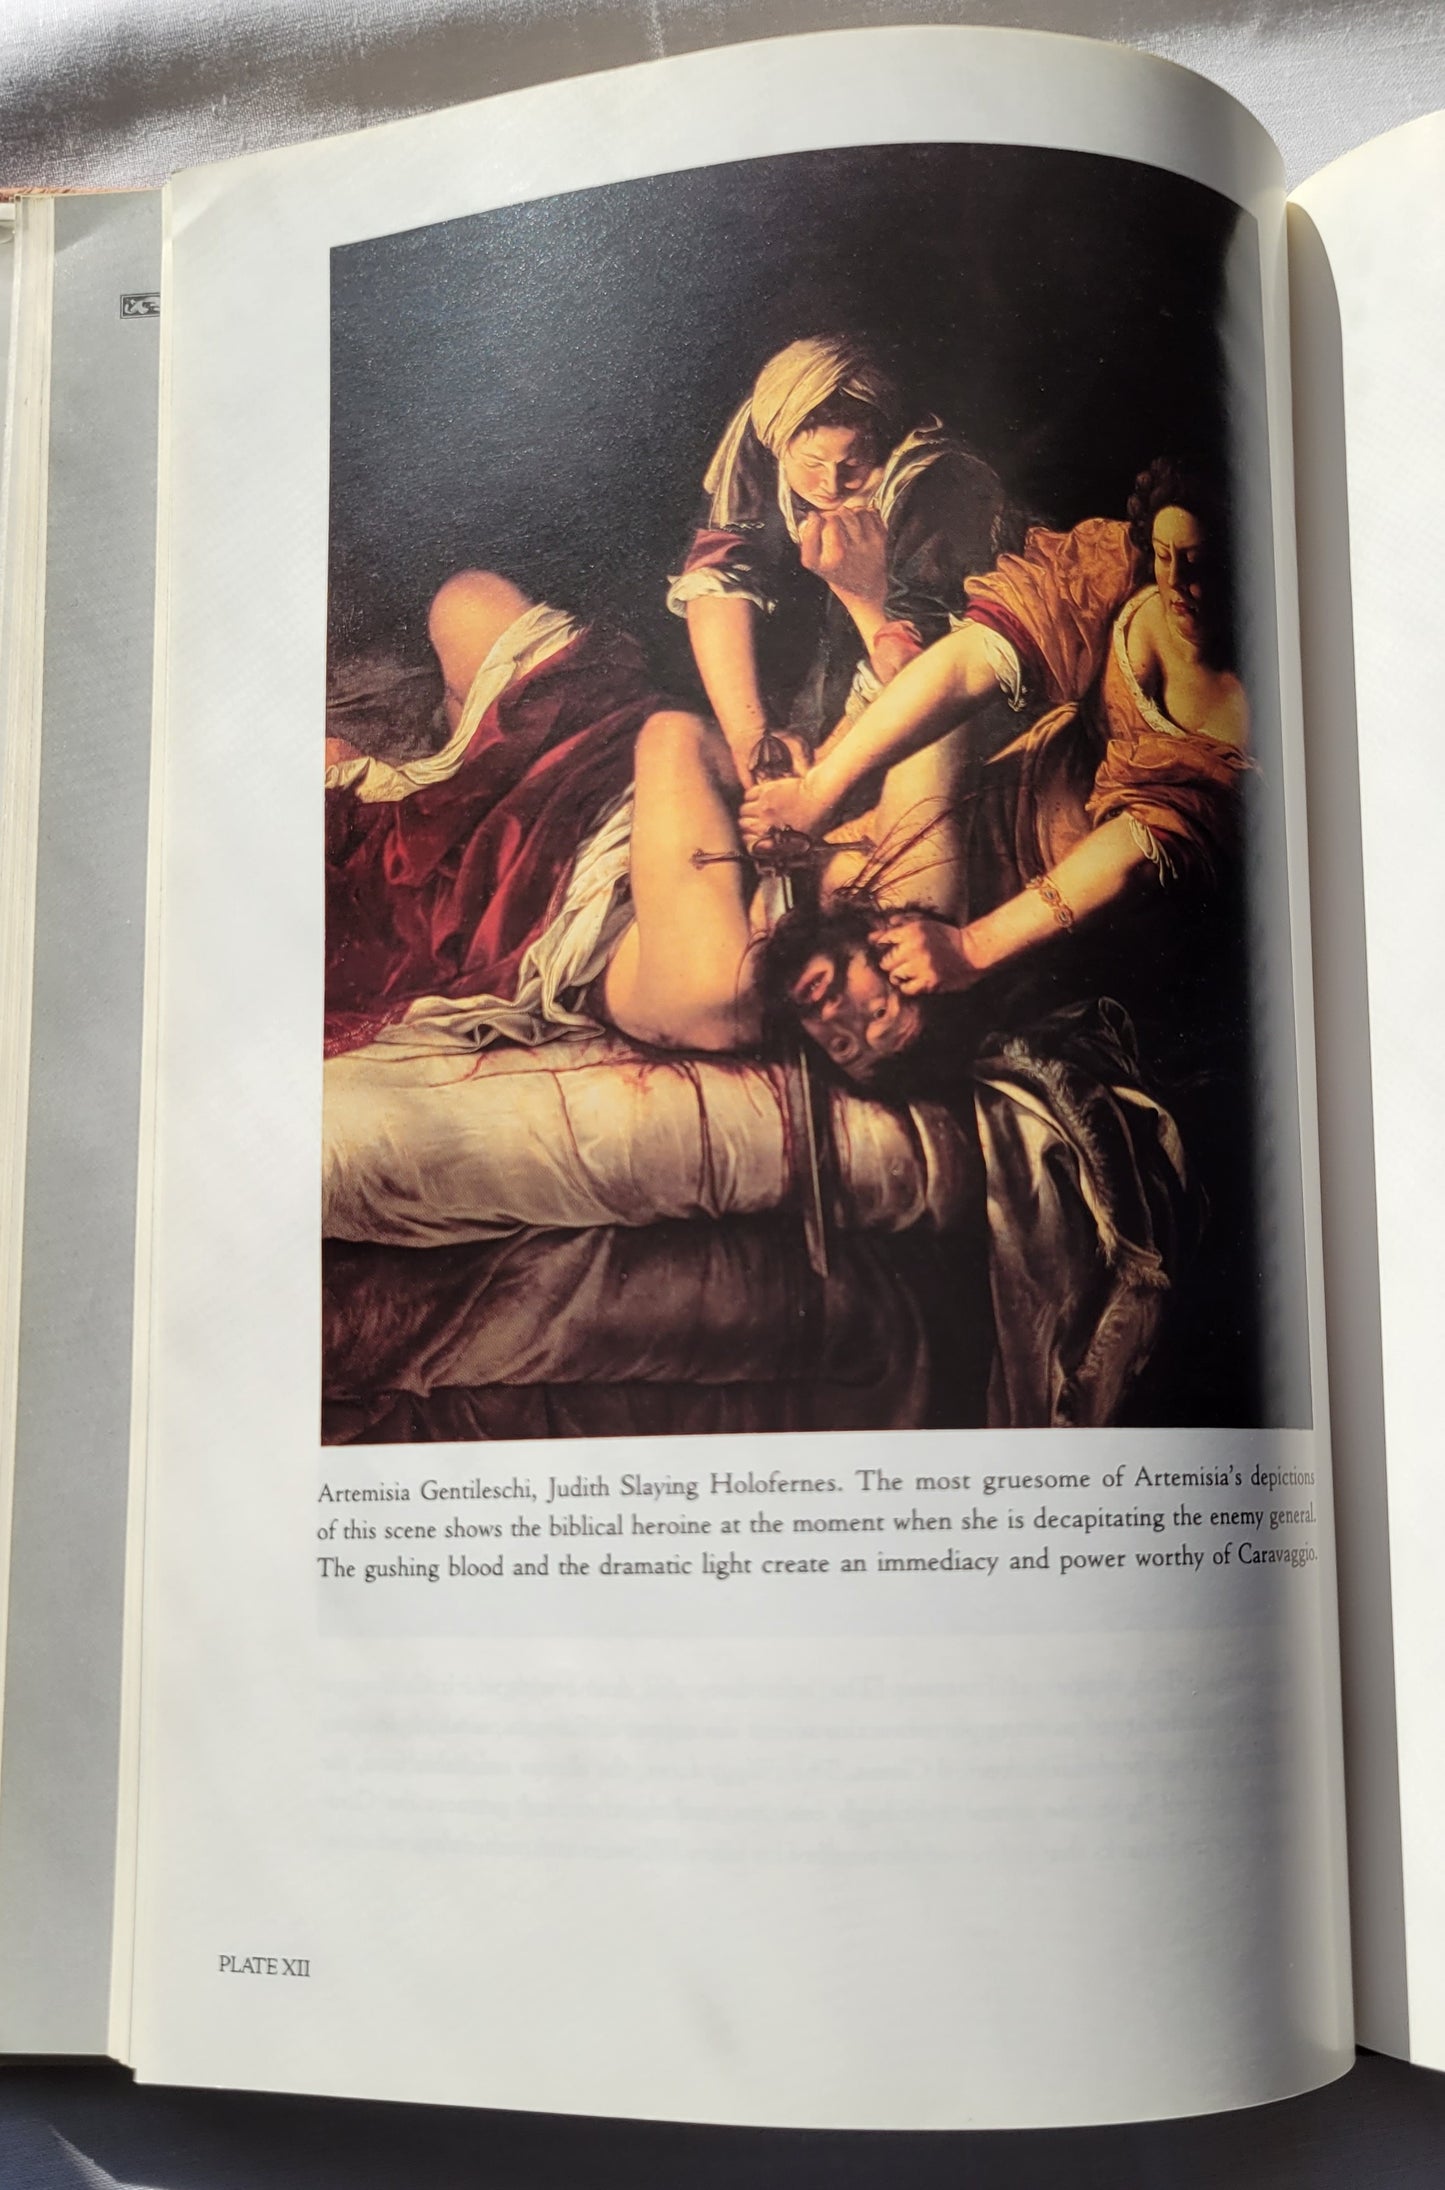 Used book for sale, "Renaissance Lives: Portraits of an Age" by Theodore K. Rabb published by Basic Books in 1993. View of painting in book.